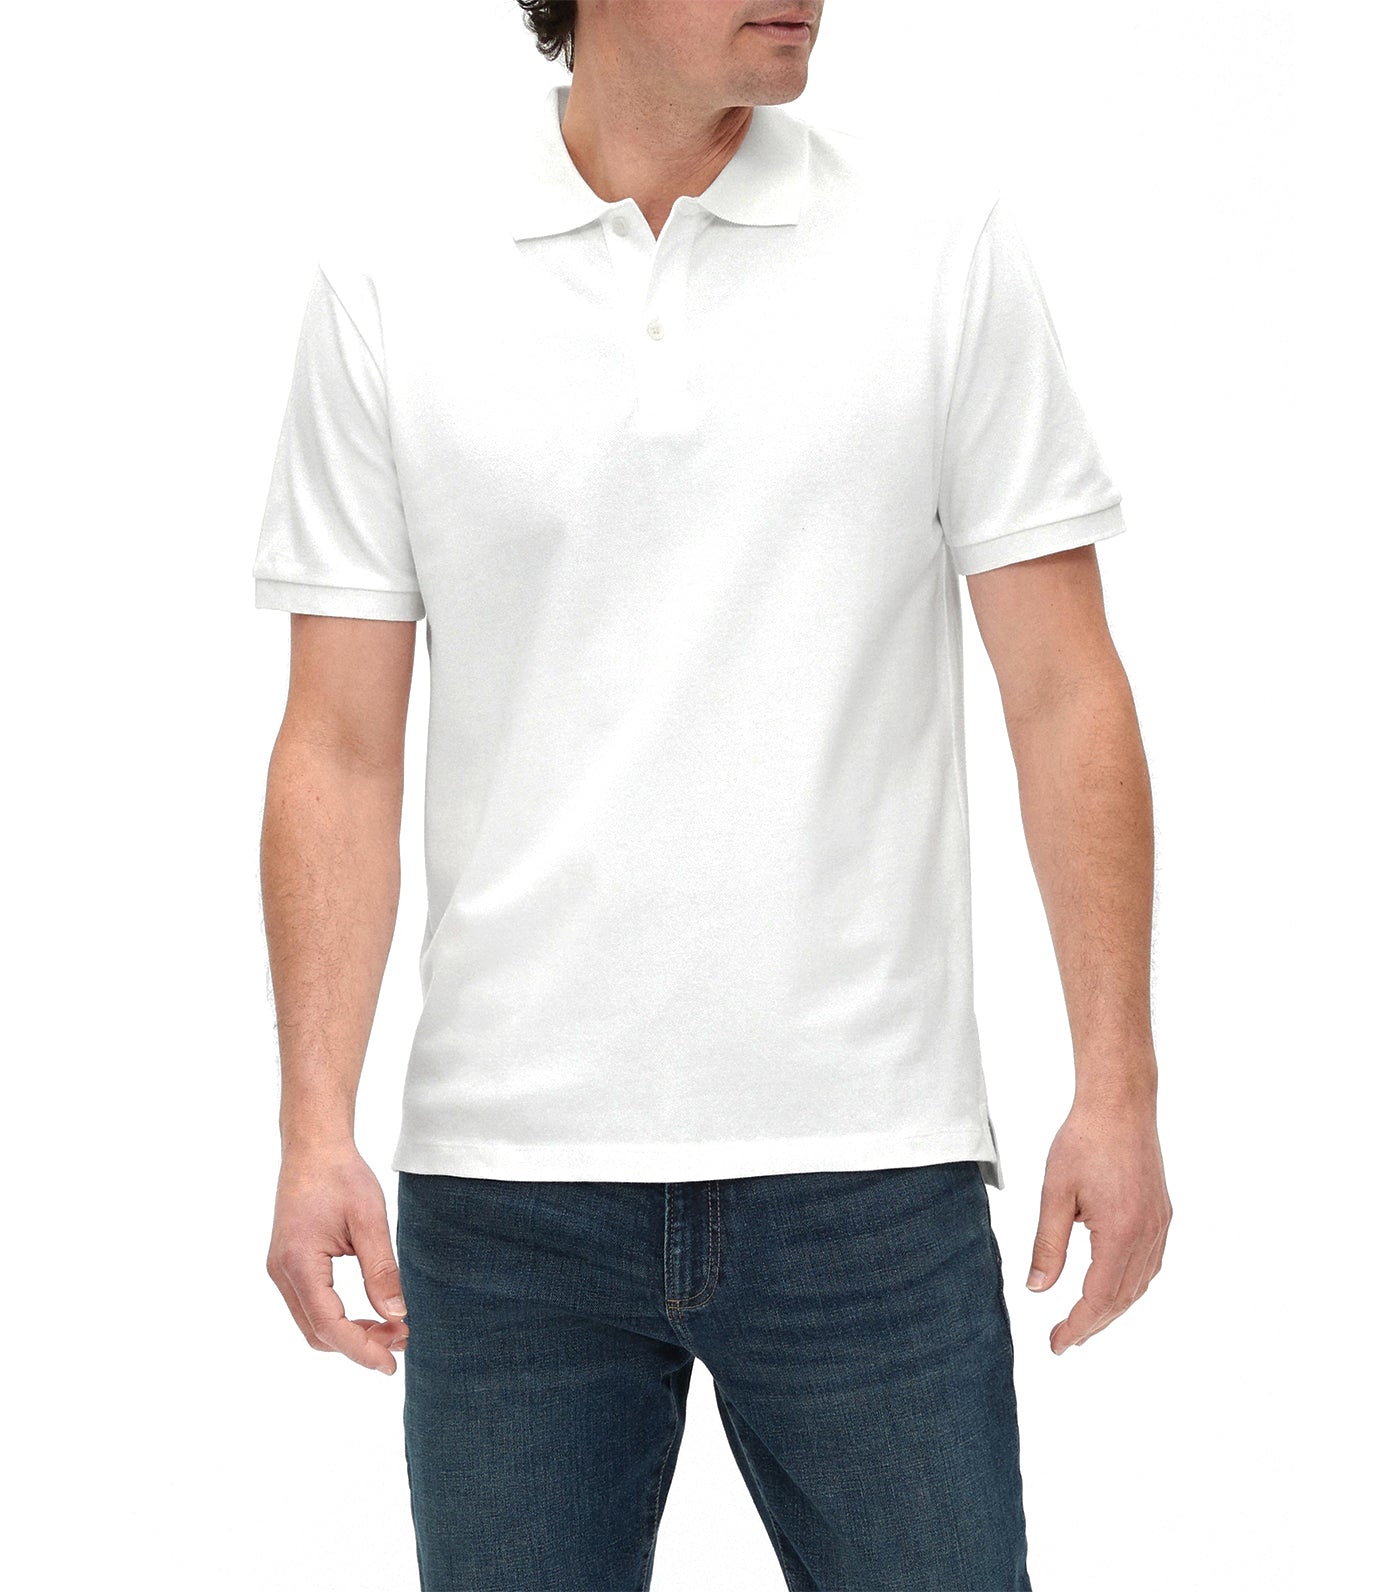 Sunspel Terry Towelling Polo Shirt White, Towelling Polo Shirt